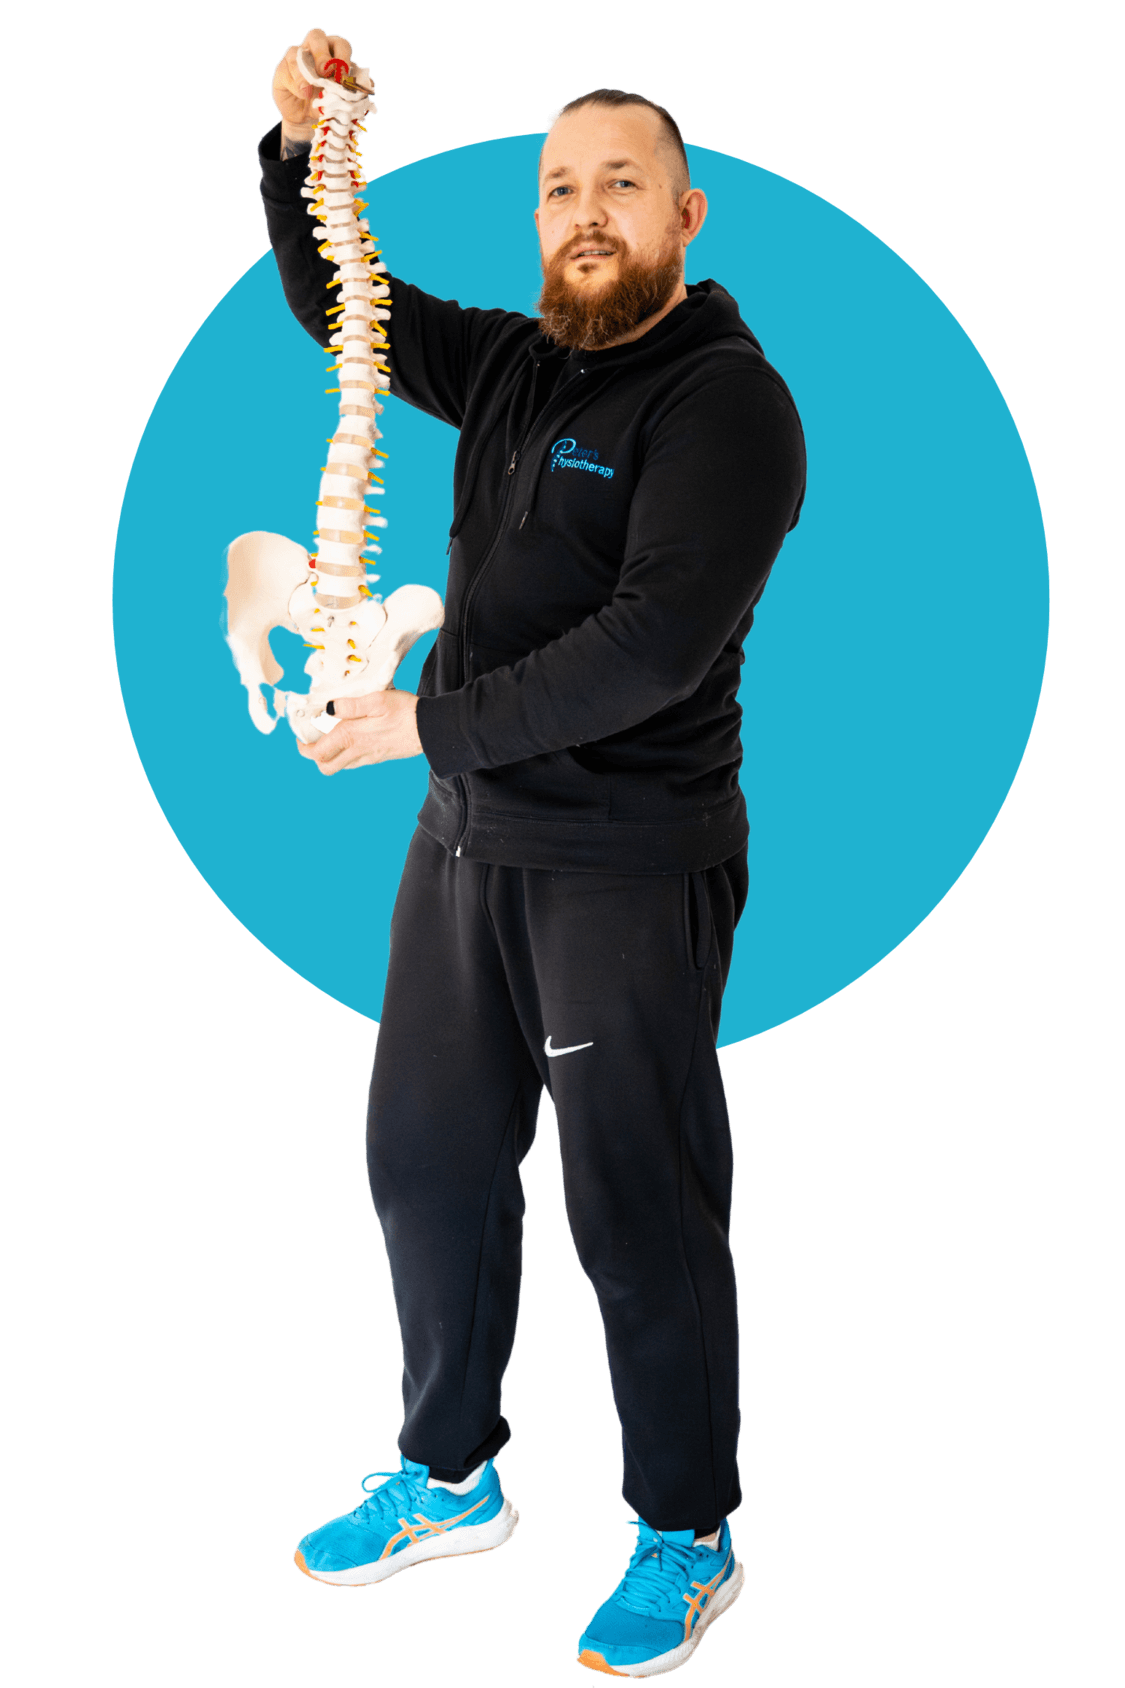 Glasgow-based physiotherapist holding a spinal model to demonstrate spine health